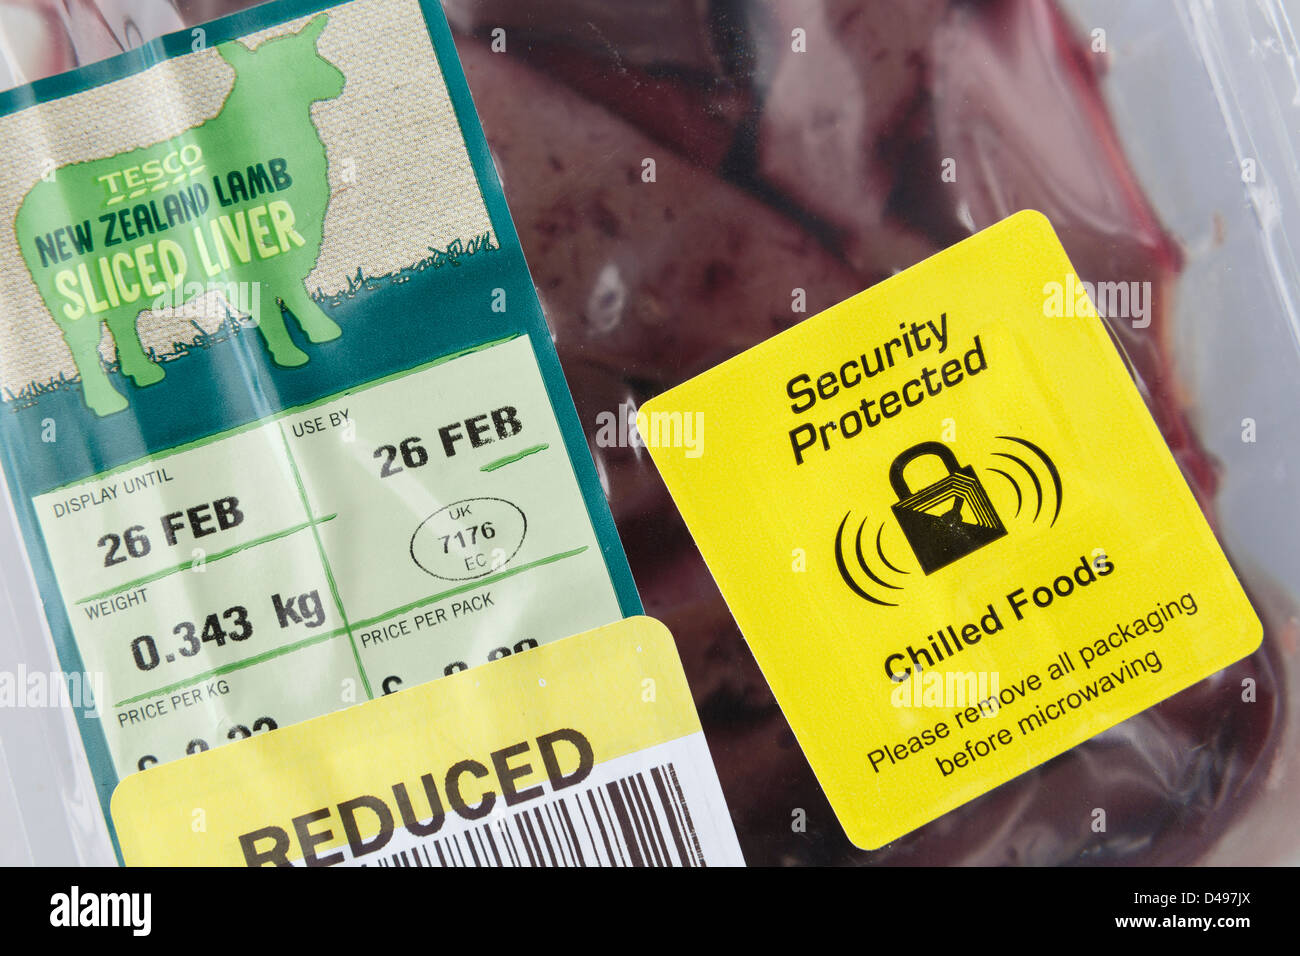 Yellow Security protected label for chilled foods on a reduced packet of fresh New Zealand Lamb sliced liver from Tesco. England UK Britain Stock Photo